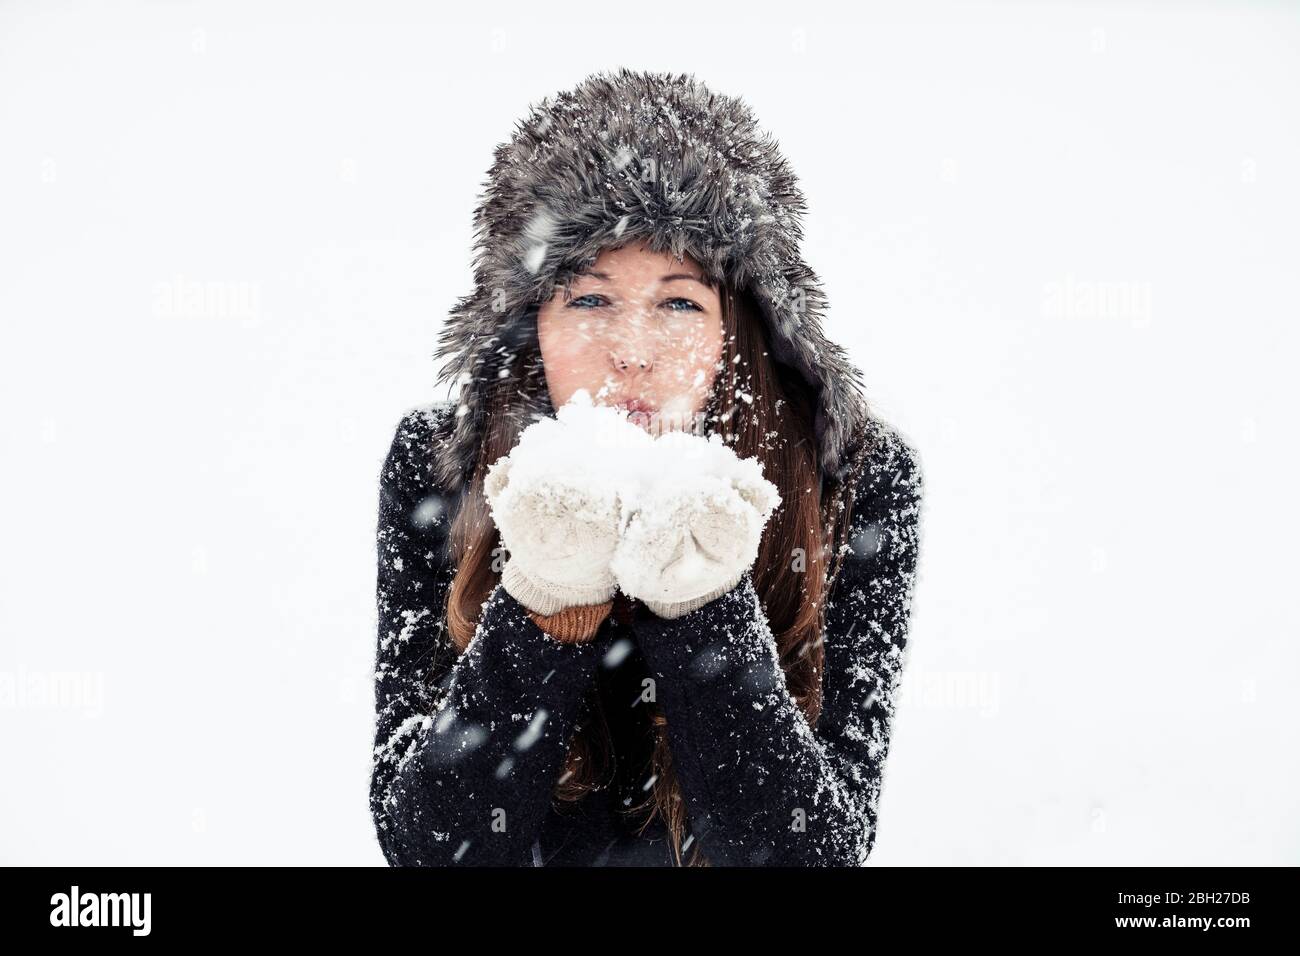 Portrait of young woman blowing snow Stock Photo